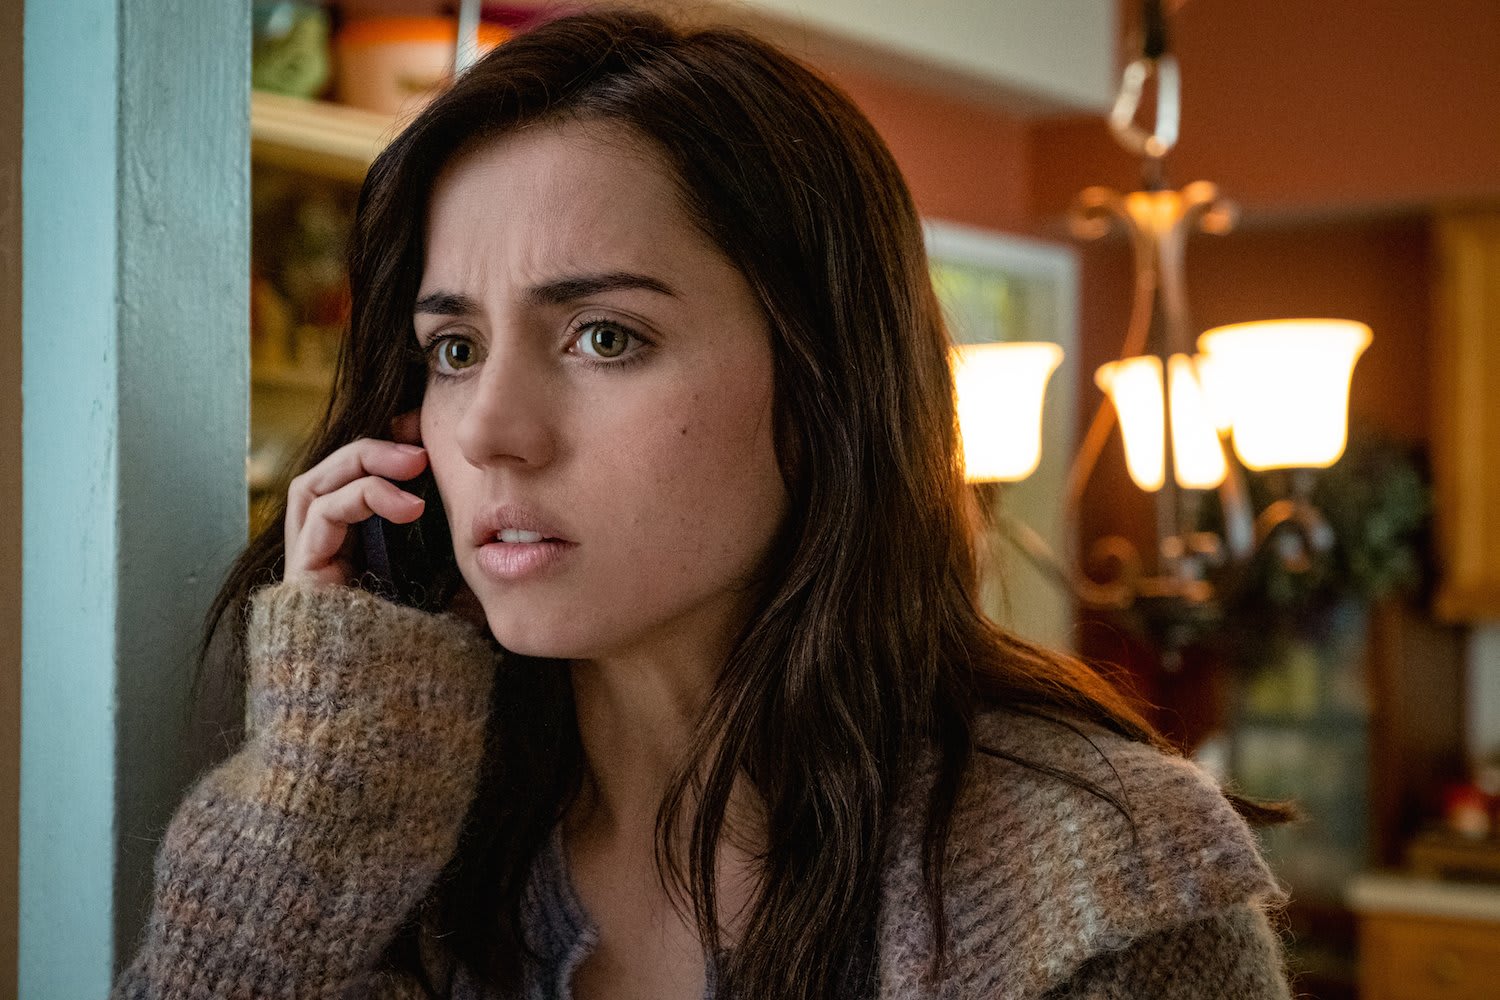 REVIEW: Ana de Armas's Character in 'Knives Out' Is the Latina Heroine We Need in the Trump Era